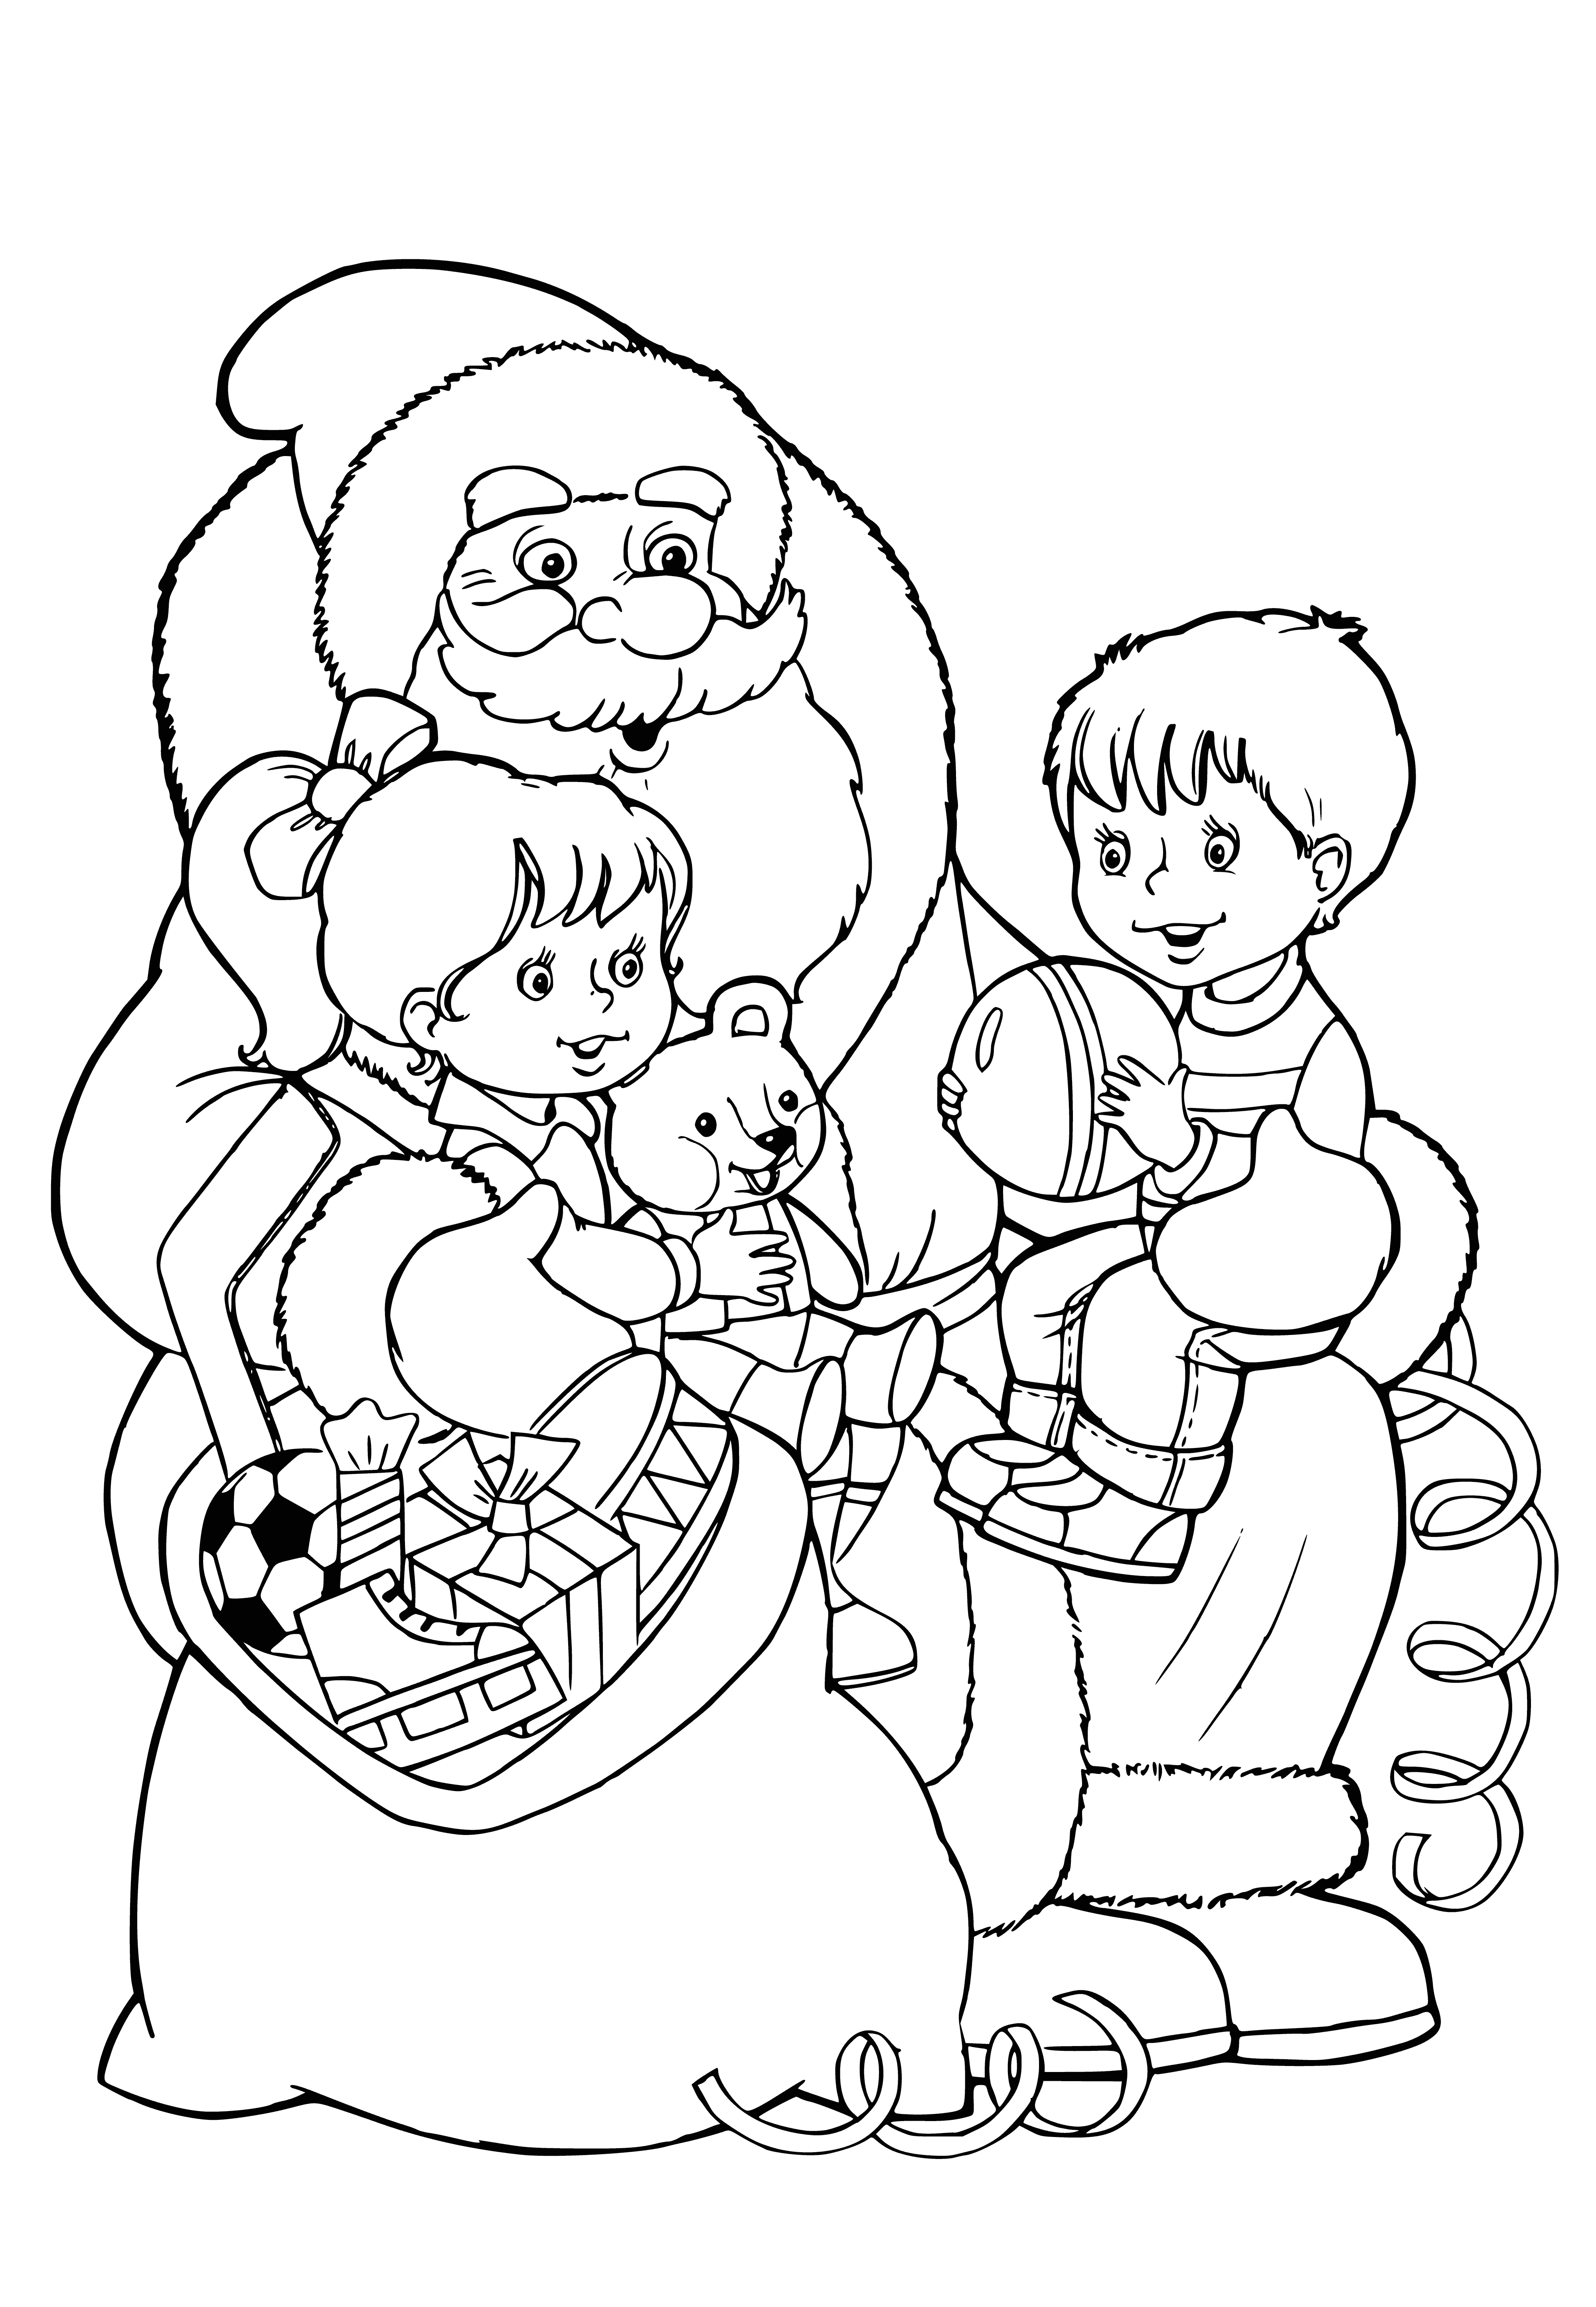 coloring page: Children surround Santa in a coloring page, appear happy & excited. Santa has white beard & holds a sack of presents.